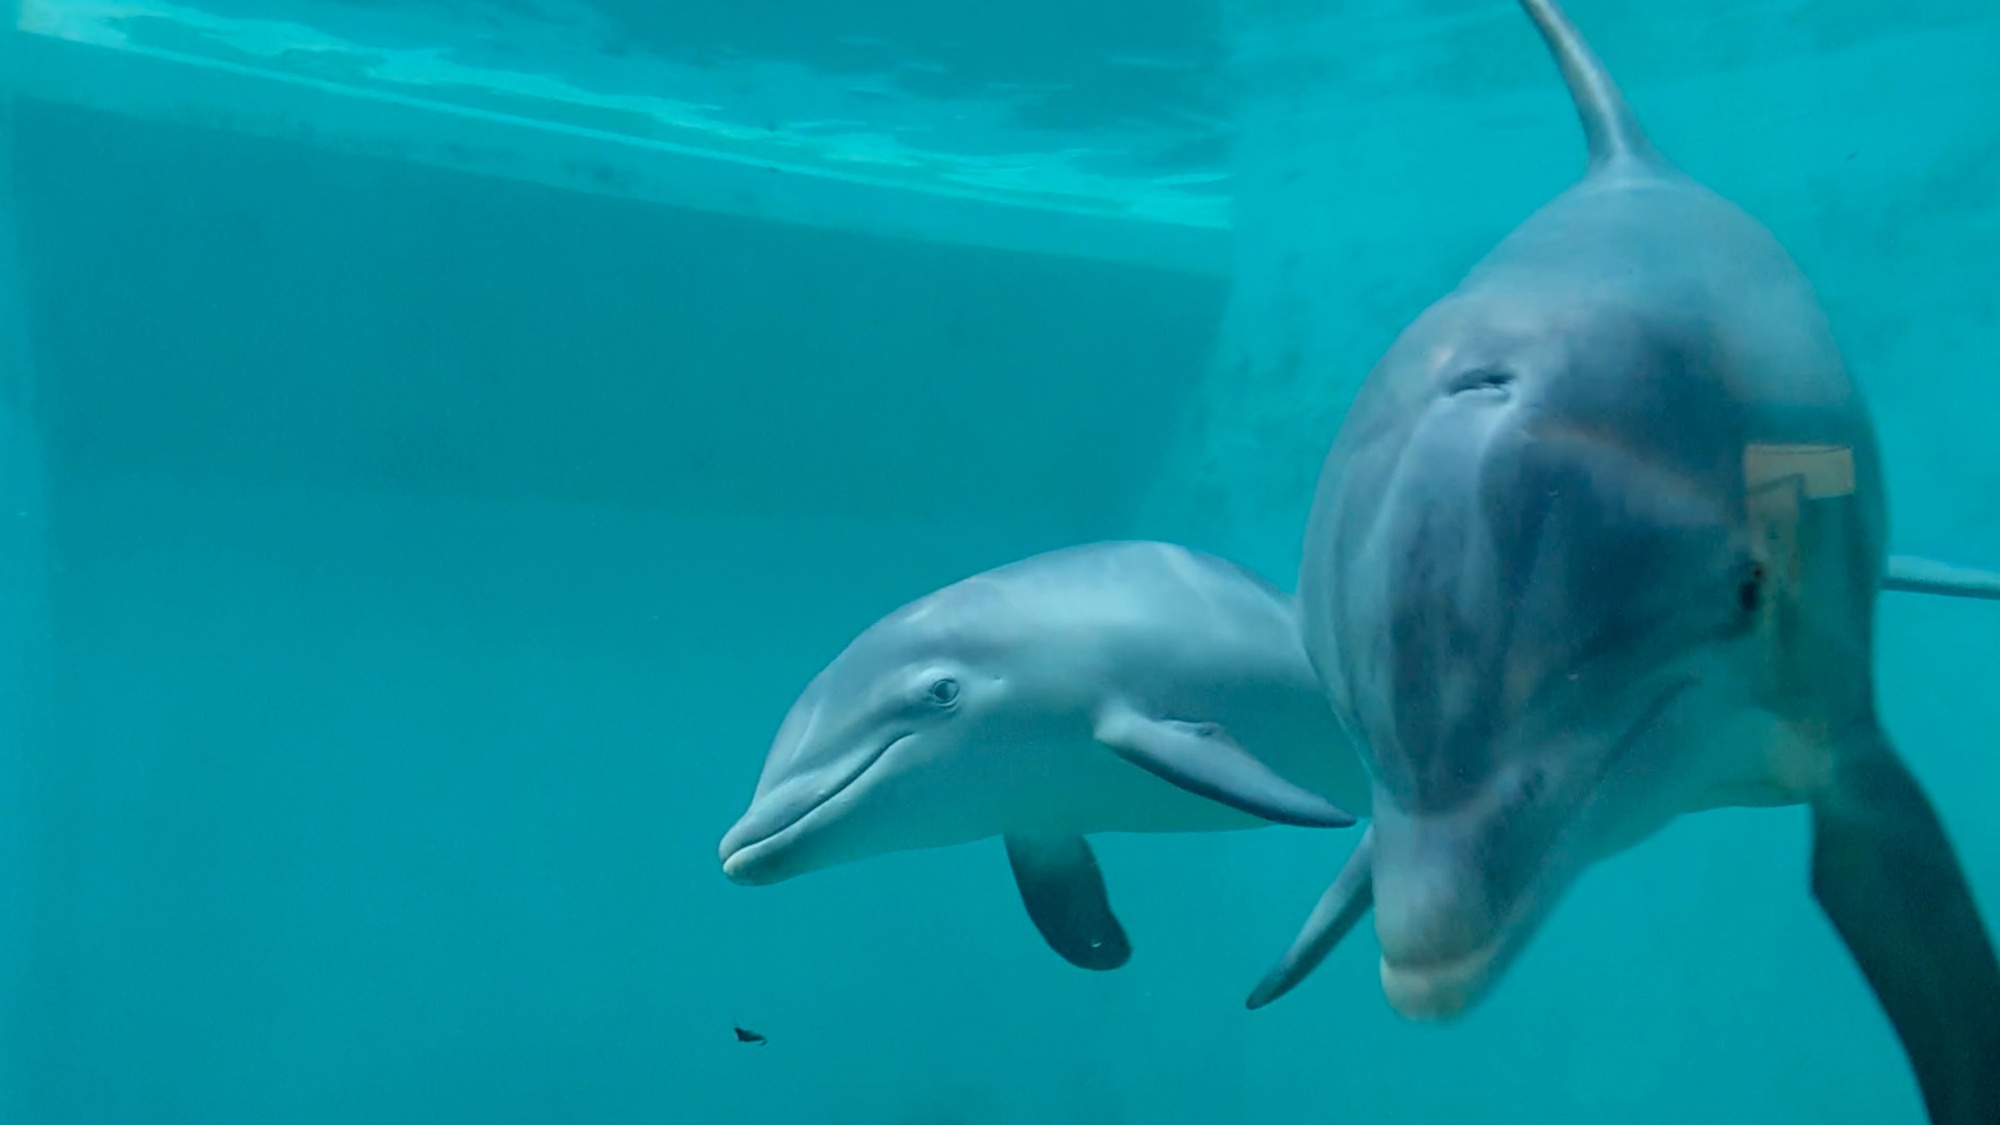 Read more about the article Moment Baby Dolphin Frolics With Happy Mum At German Zoo